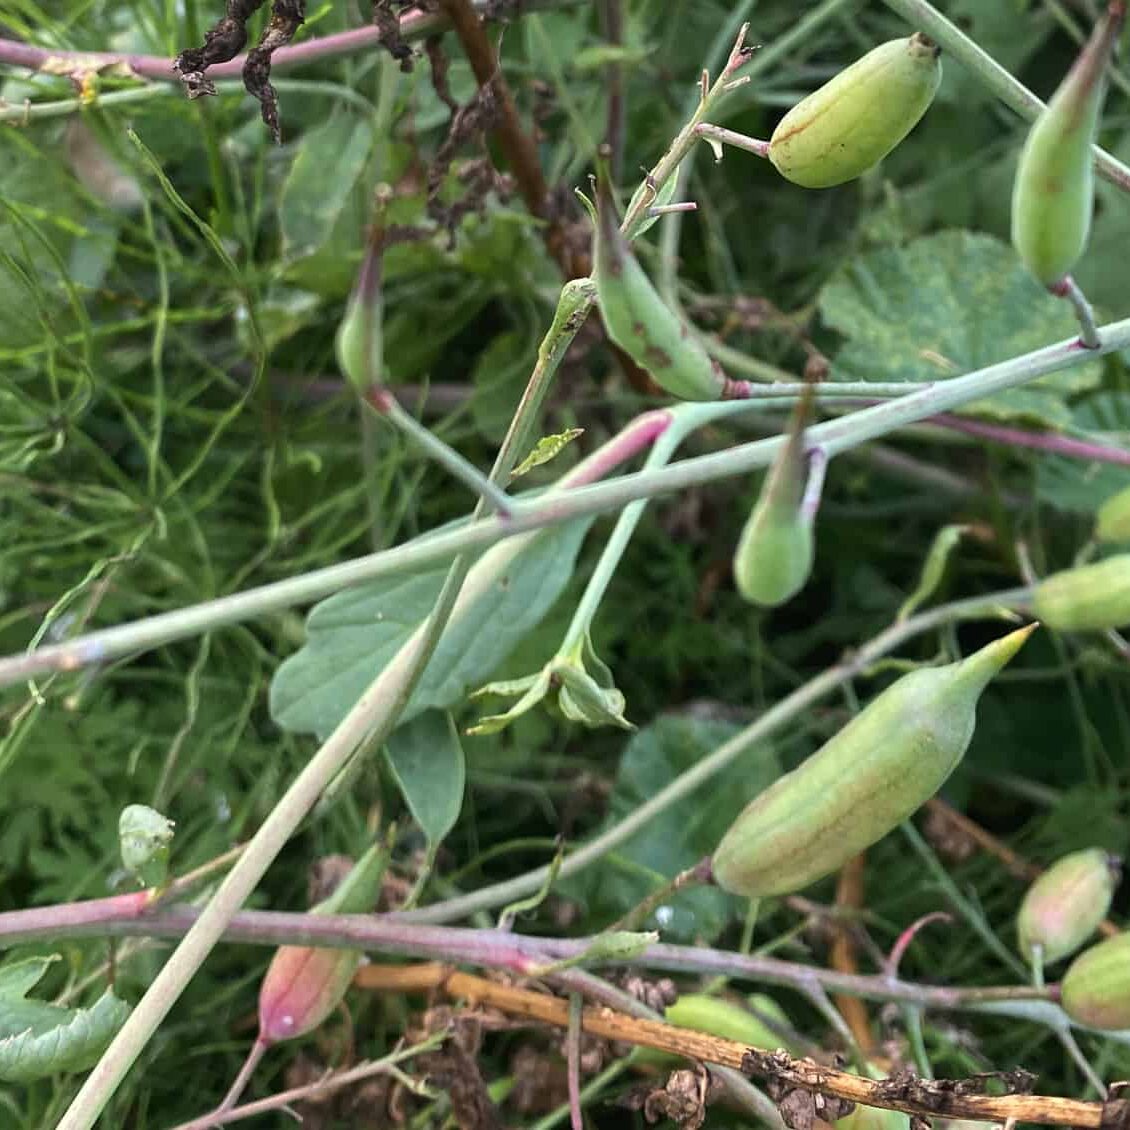 Radish seed pods can be collected when they turn brown and look dried out. Interestingly, they are also edible. © Photo by Sheri Rylaarsdam